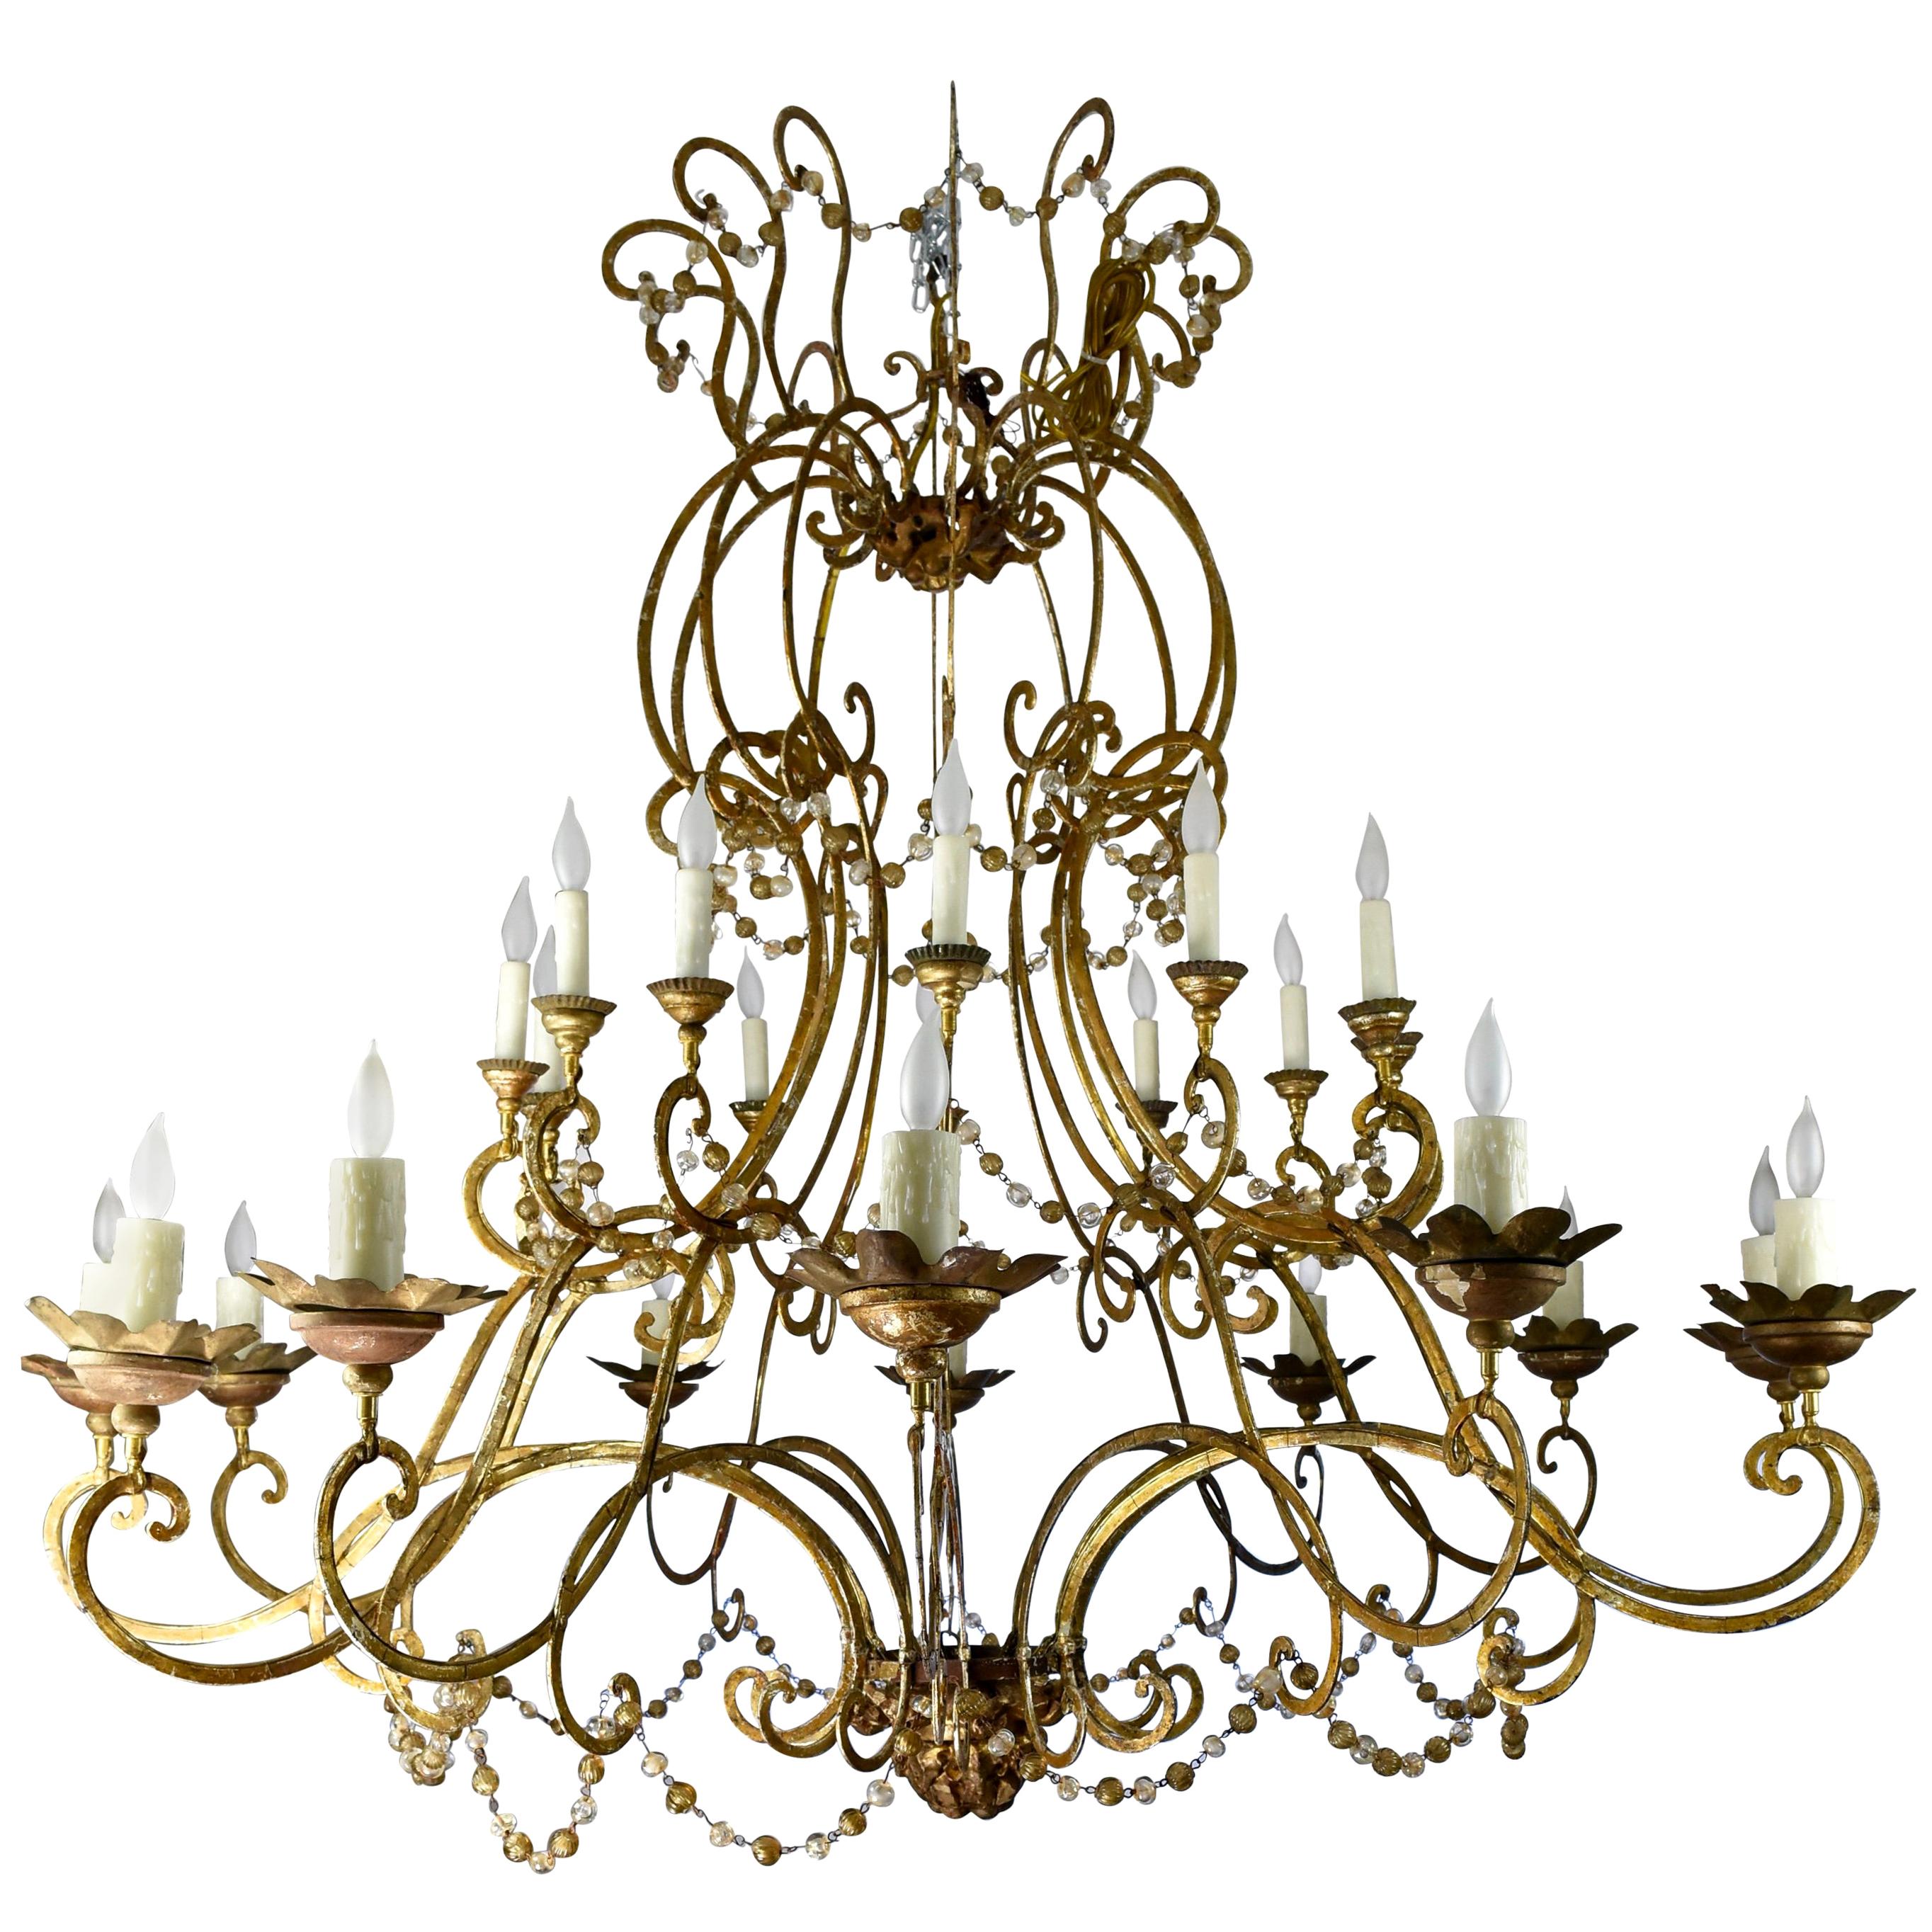 Italian 18th Century Gold Gilt Elements, Glass Bead and Iron Chandelier